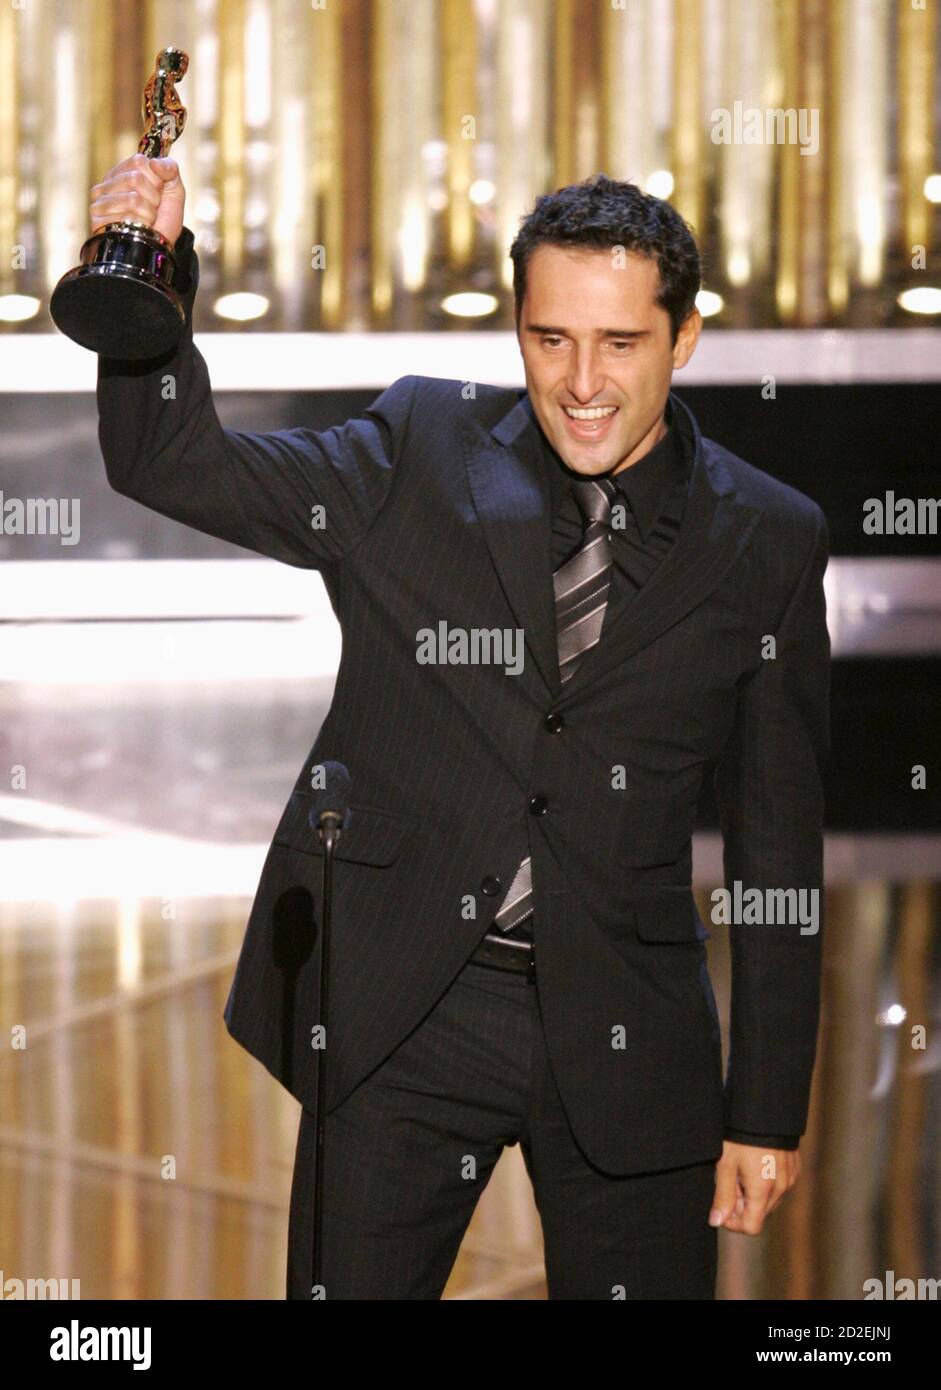 Jorge Drexler holds up his Oscar after winning best original song for 'Al Otro Lado Del Rio' at the 77th Annual Academy Awards in Hollywood, California in this February 27, 2005 file photo. The Uruguayan singer-songwriter is on a nine city U.S. tour that ends March 14, 2007 in San Francisco to promote his record '12 Segundos de Oscuridad'. REUTERS/Gary Hershorn/Files  (UNITED STATES) Stock Photo